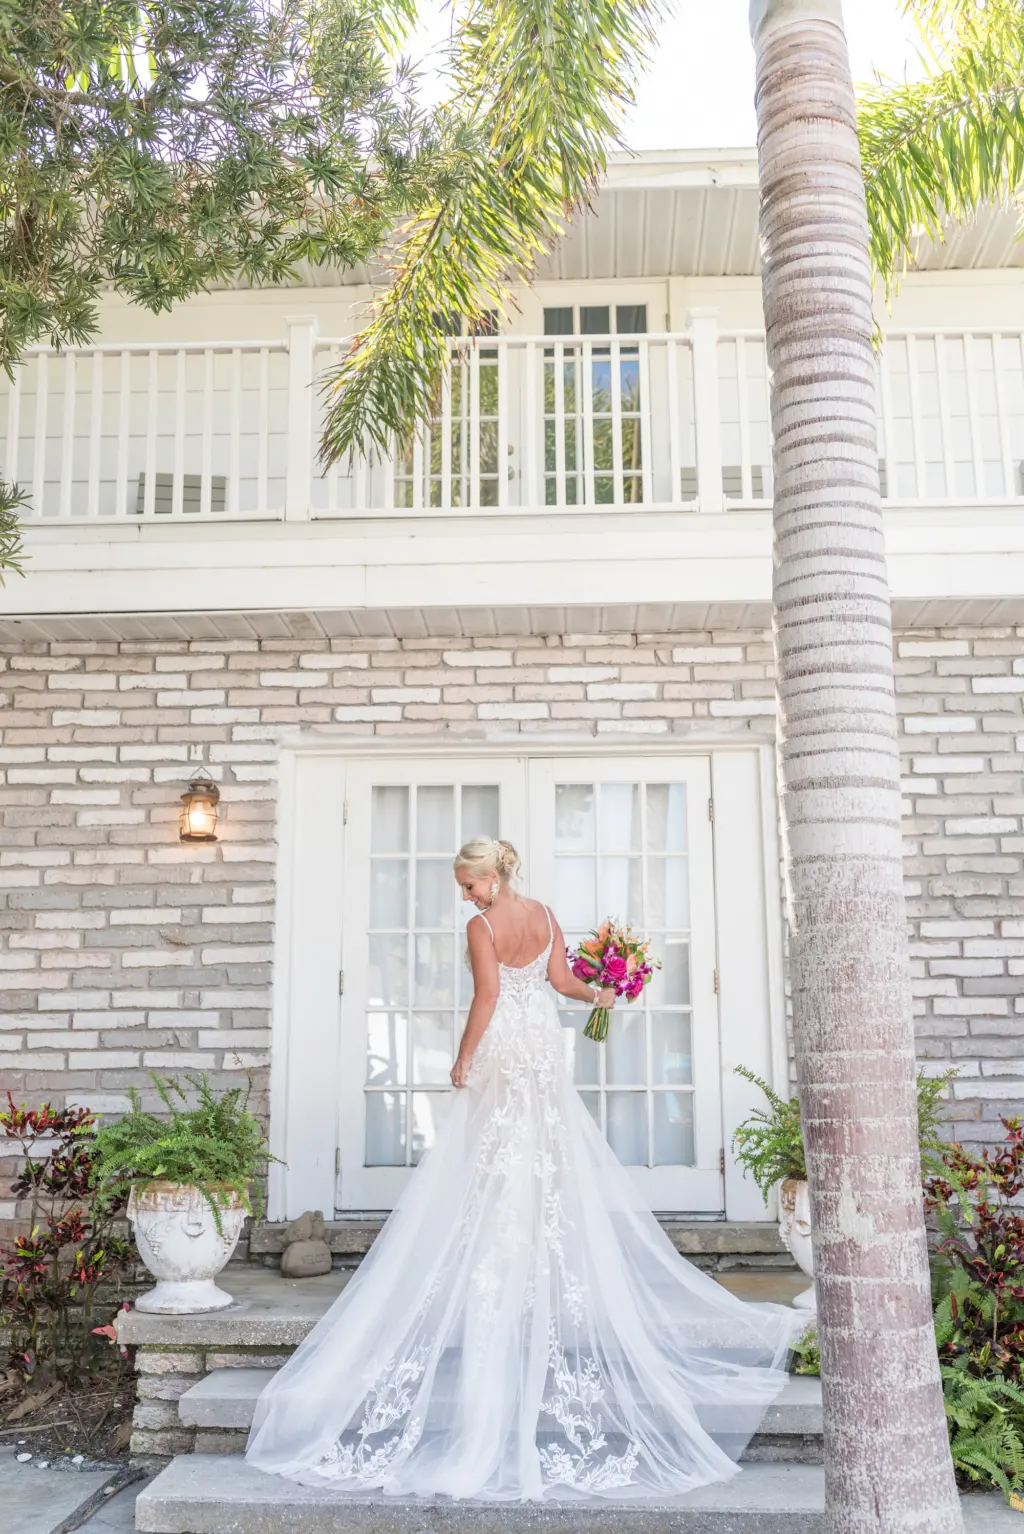 Lace Wedding Dress and Tropical Pink and Orange Wedding Bouquet Portrait Tampa Photographer Amber Zabrocki Photography